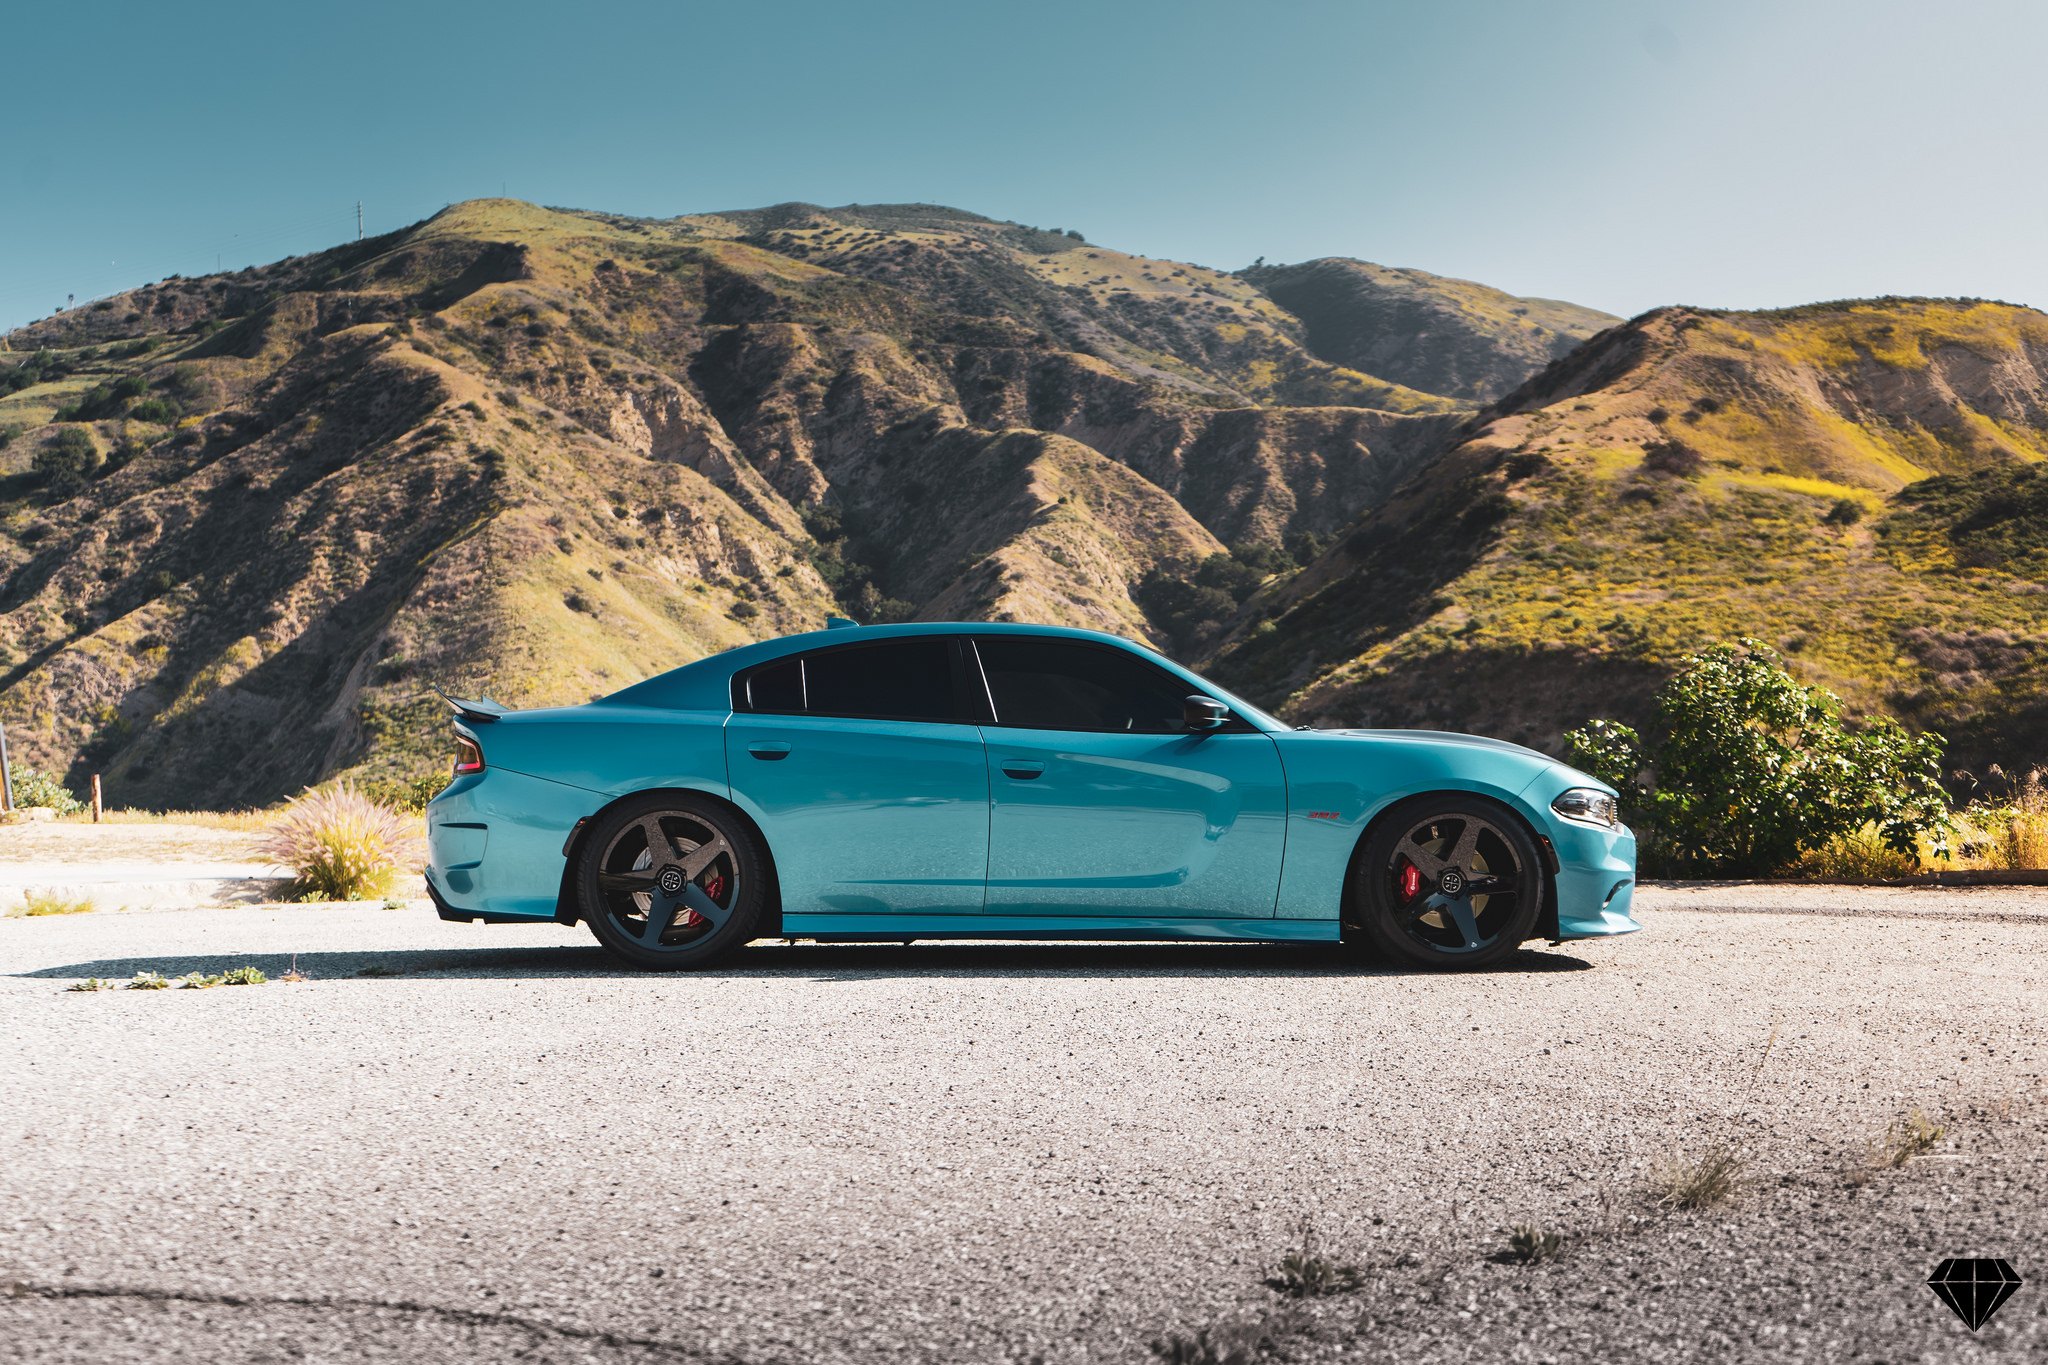 Turquoise Dodge Charger with 20 Inch Blaque Diamond Wheels - Photo by Blaque Diamond Wheels